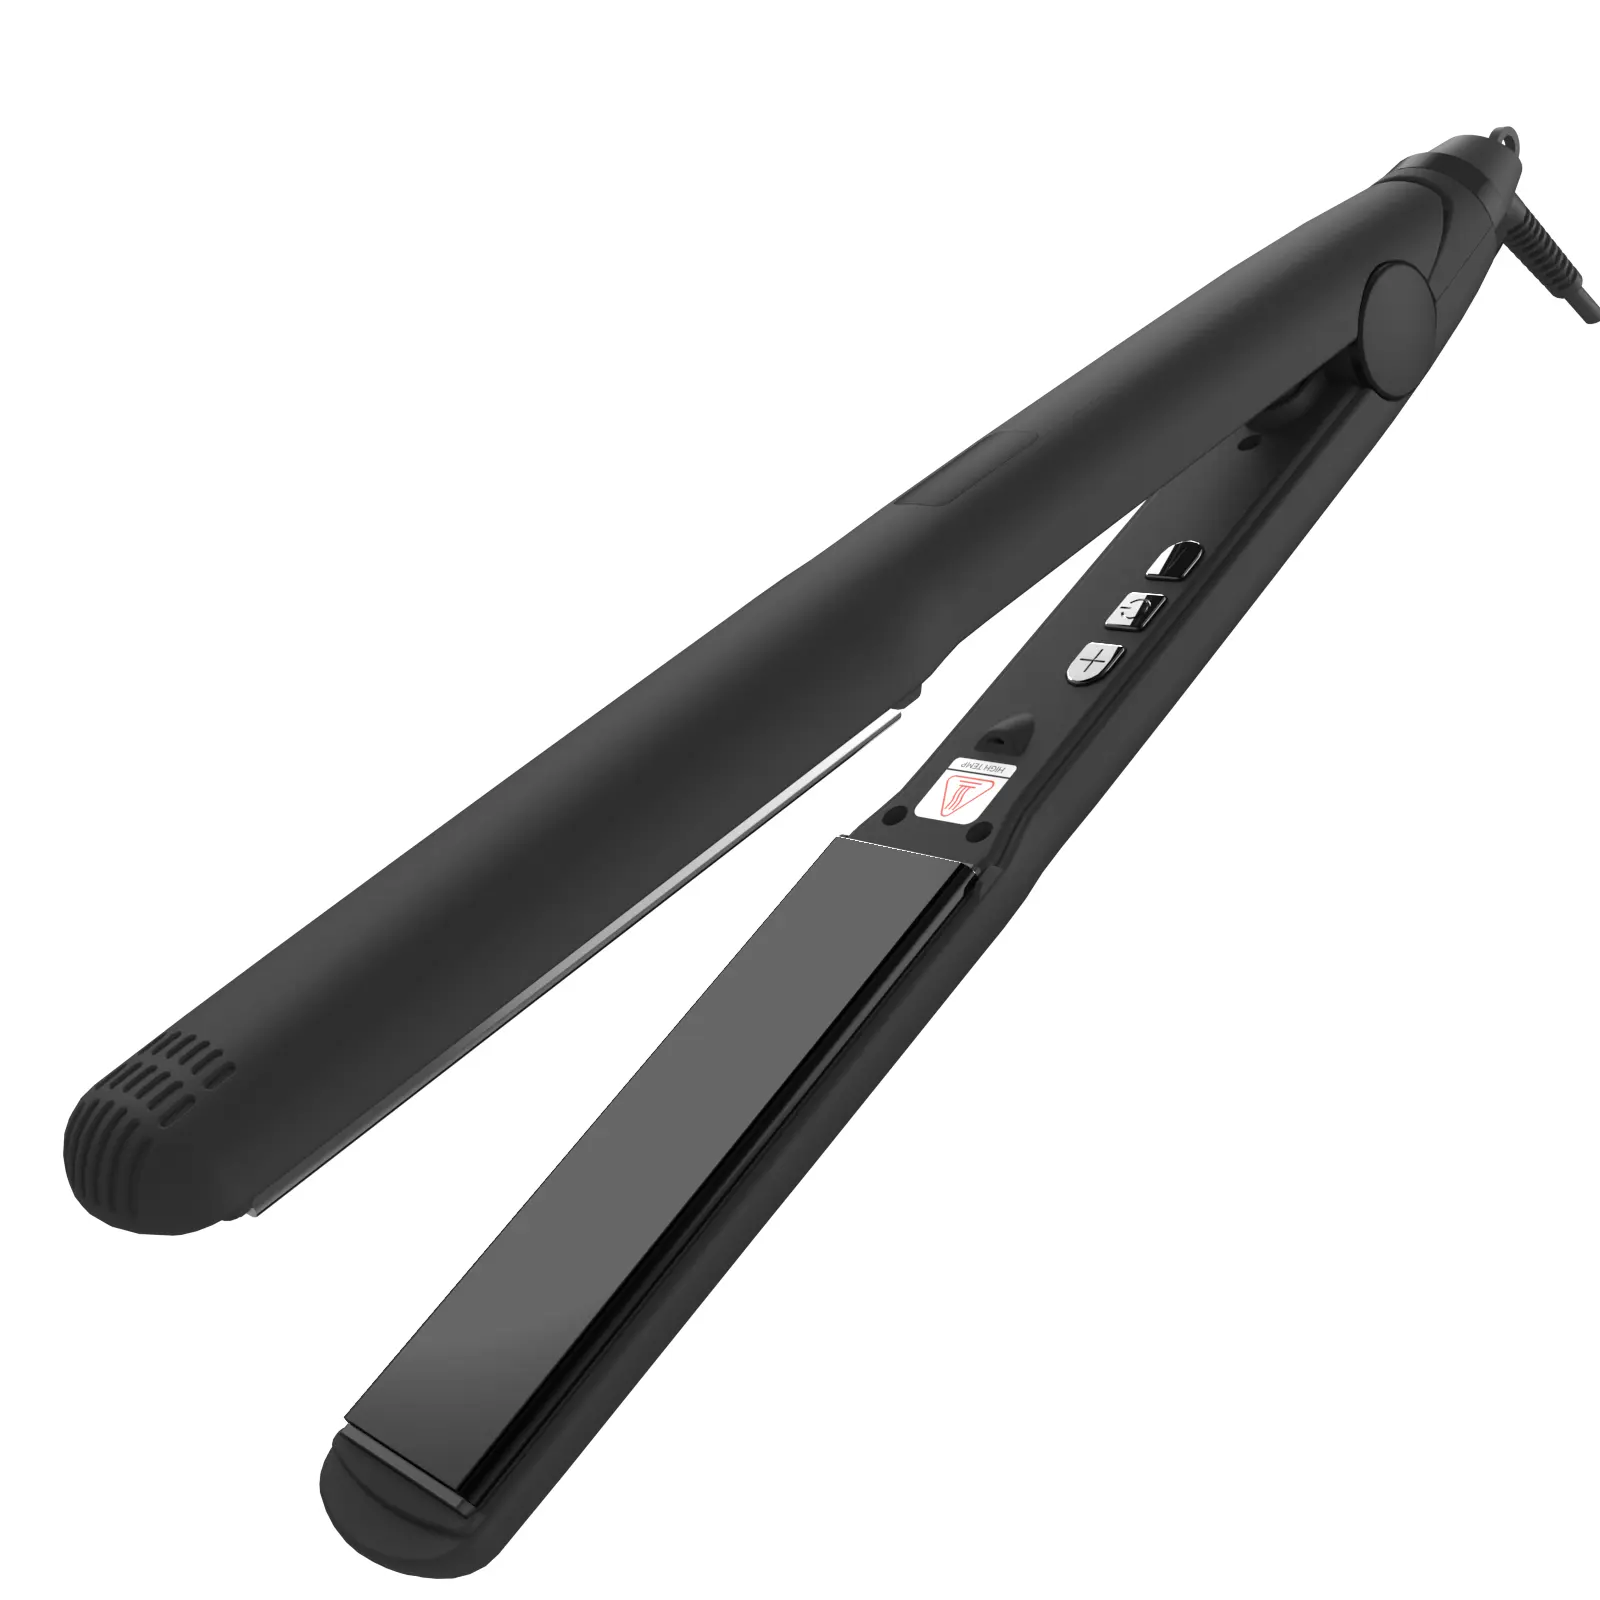 Custom rubber coating ceramic flat iron fast heating 1 Inch plates hair straightener with dual voltage LCD display